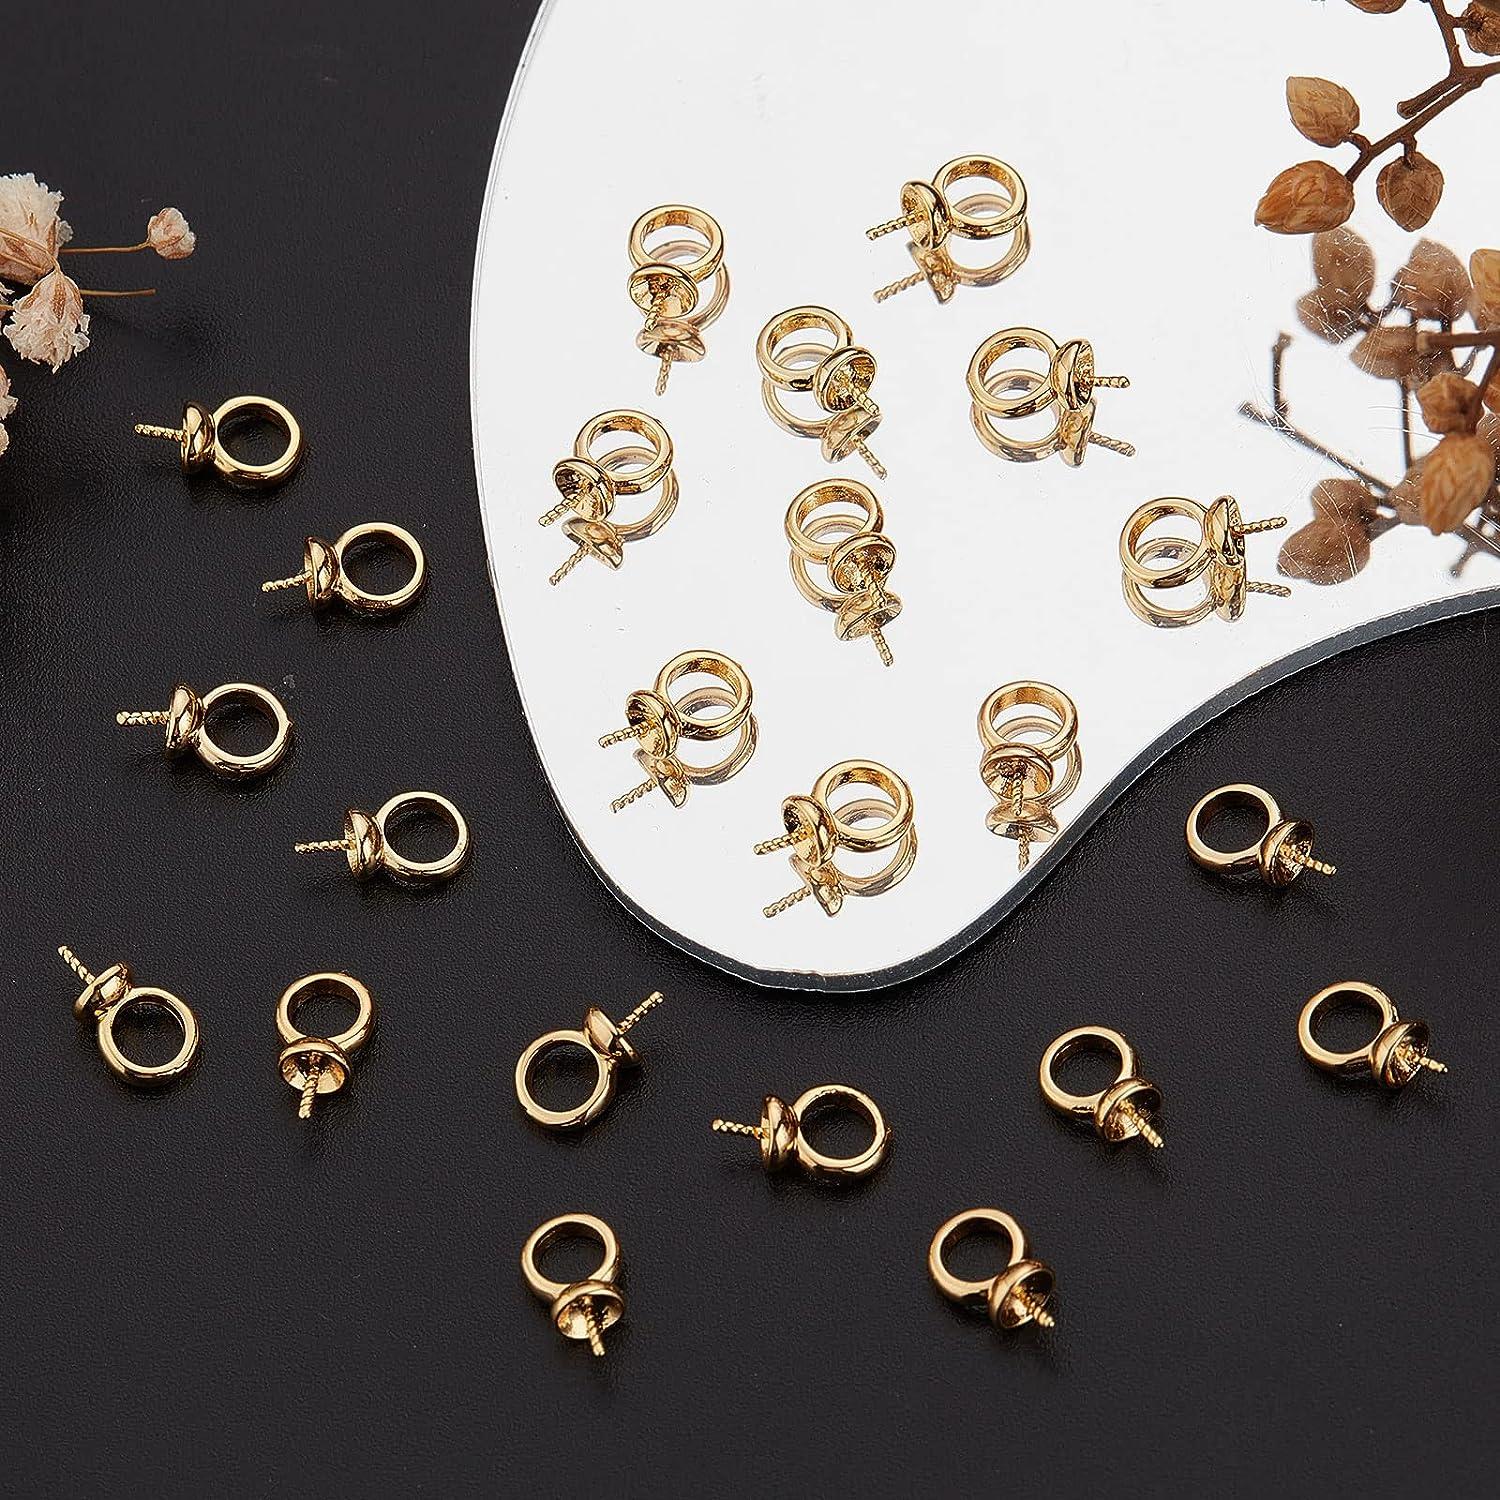 Beebeecraft 24Pcs 4 Styles Pinch Bails Clasp Brass Filigree Ice Pick Pinch  Bails Gold and Silver Color Dangle Charms Pendant Connector for Necklace